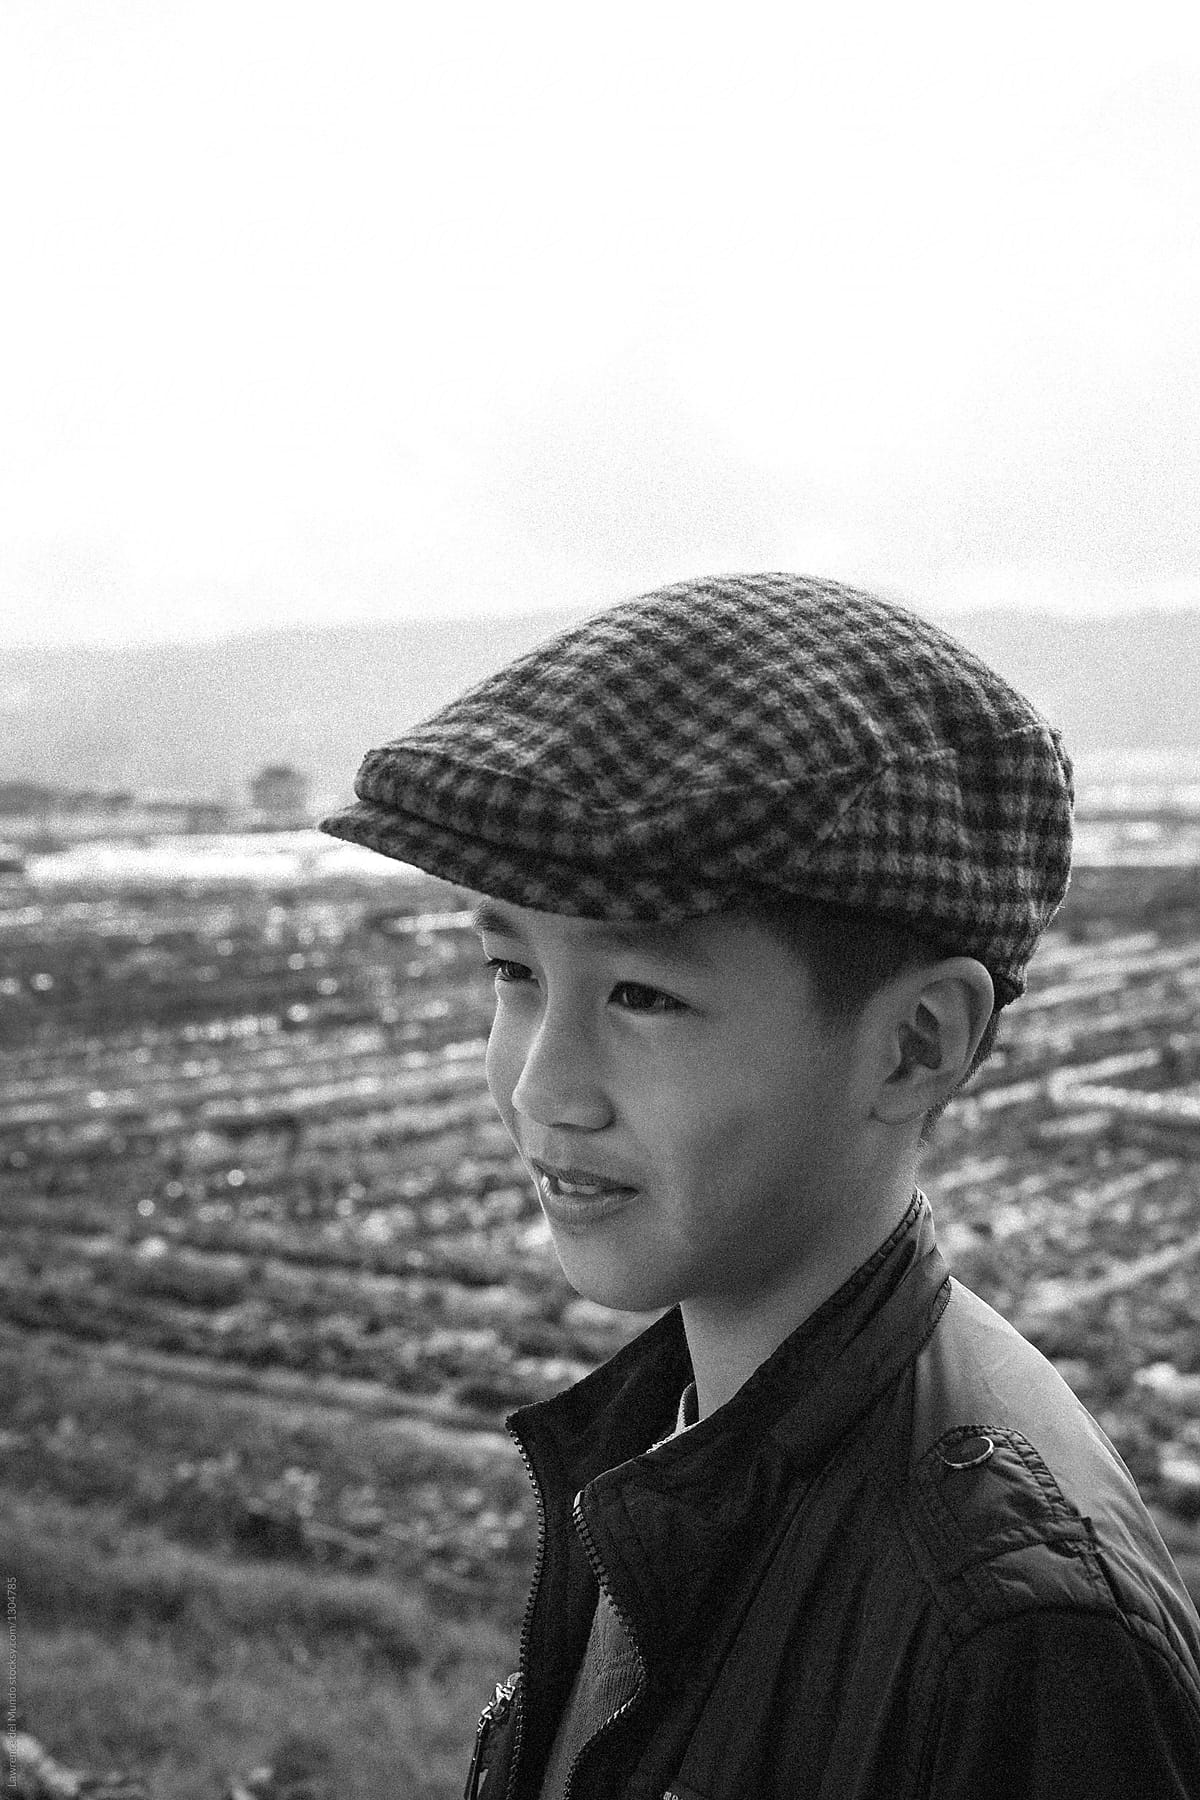 Black and white portrait of a young boy smiling but looking away from the camera.